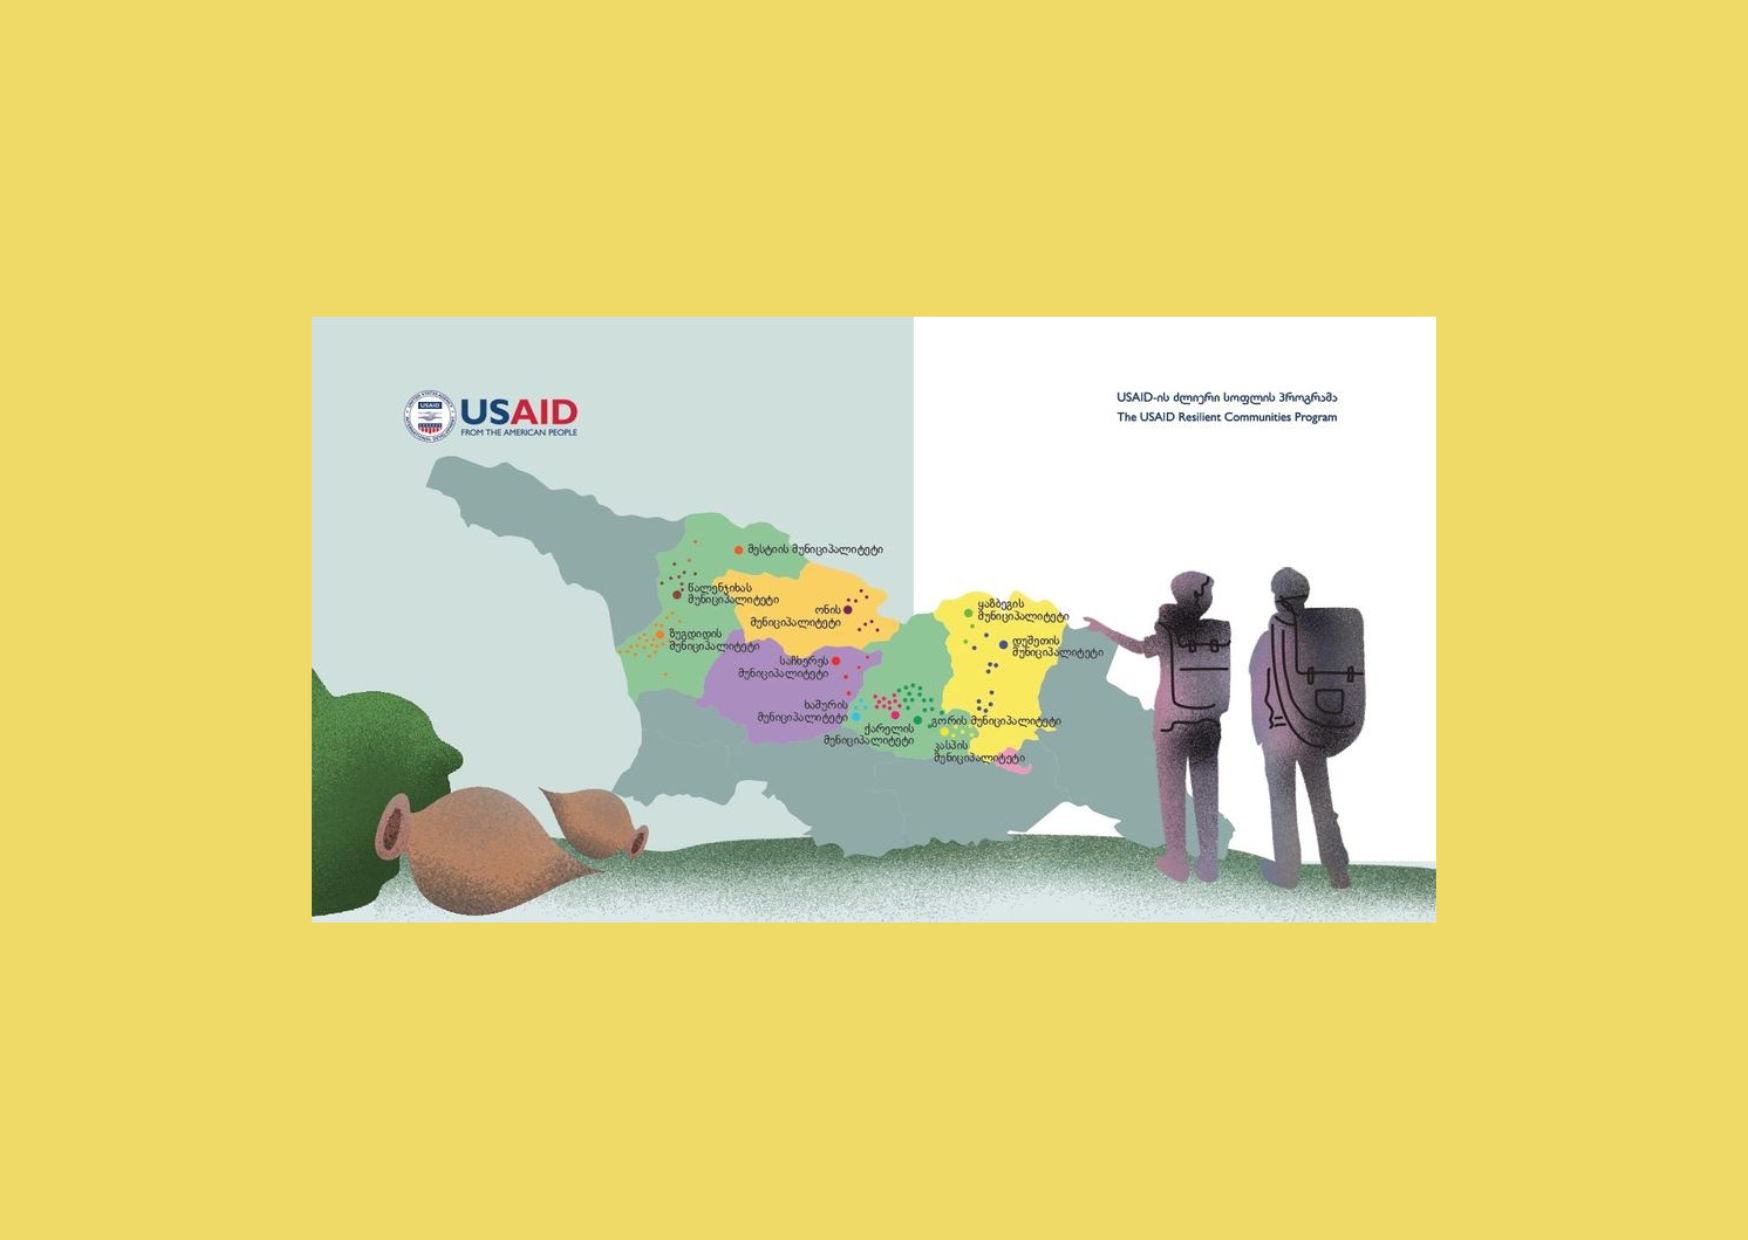 Learn more about the USAID Resilient Communities Program